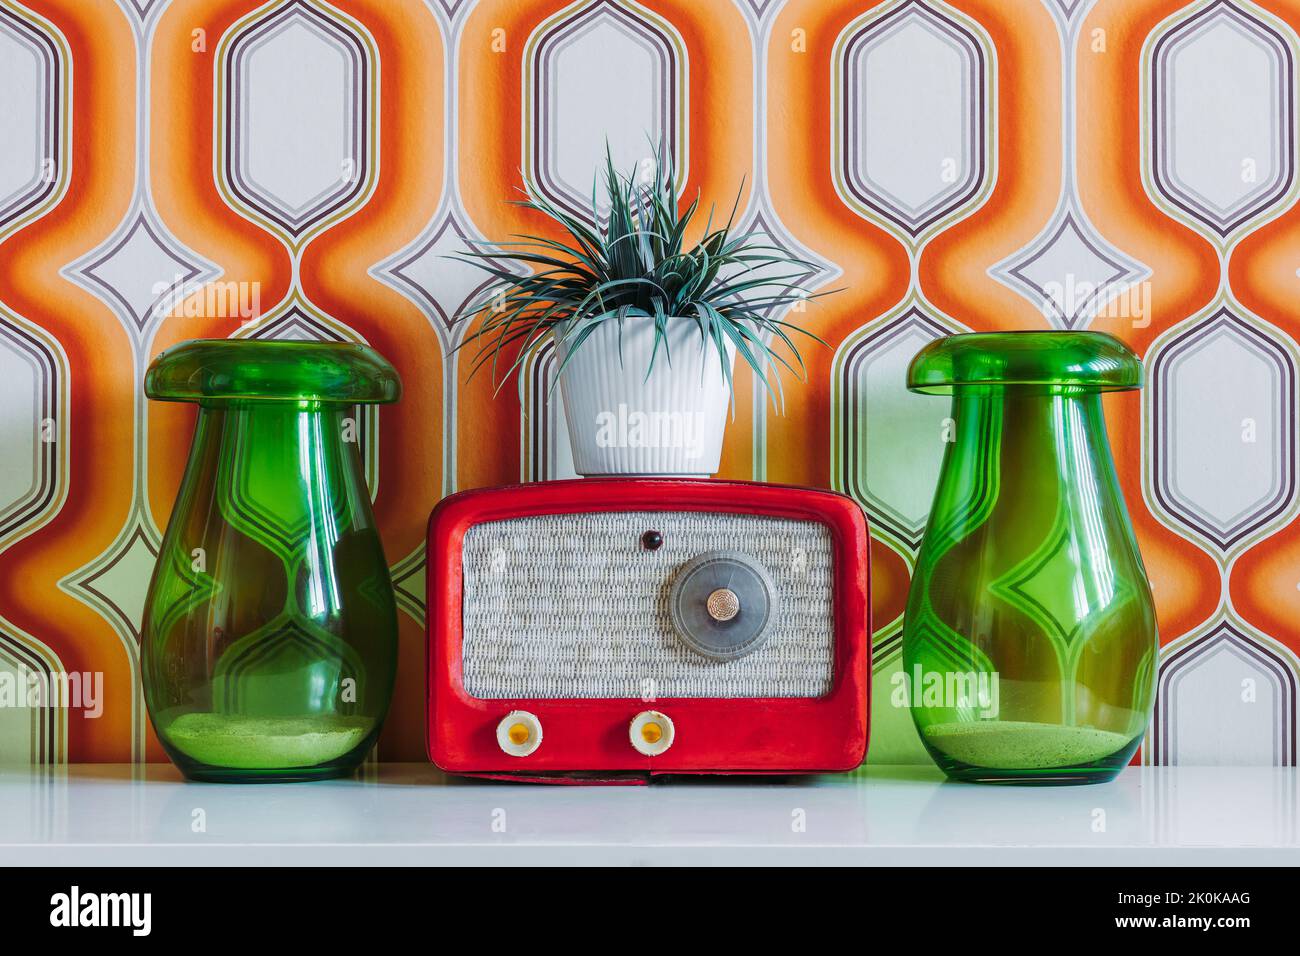 Retro fashioned radio and plant in flowerpot placed on table between green glass jars against colorful wall Stock Photo